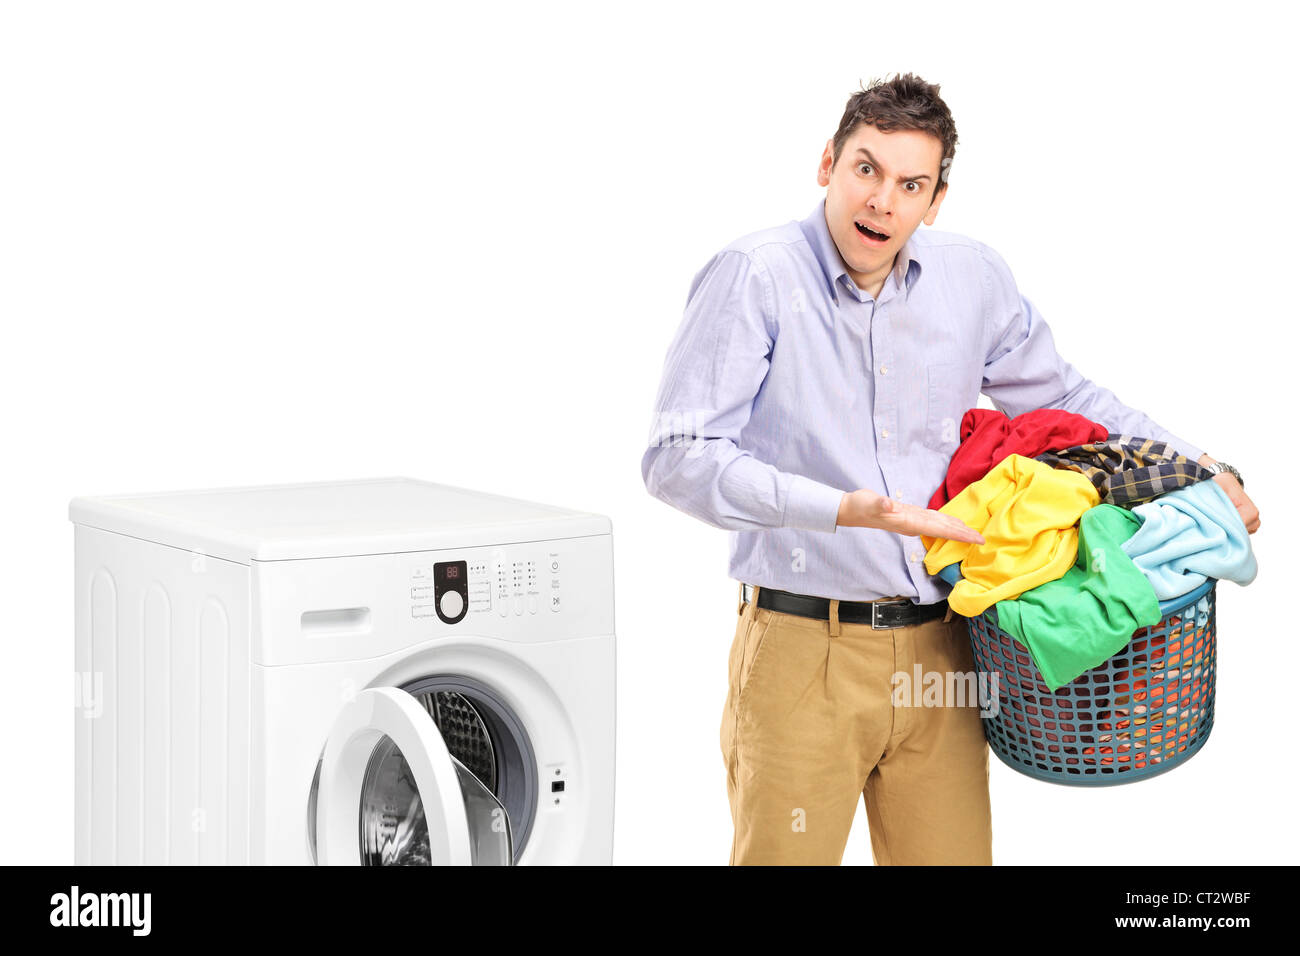 Young man holding a laundry basket and gesturing near a washing machine isolated on white background Stock Photo